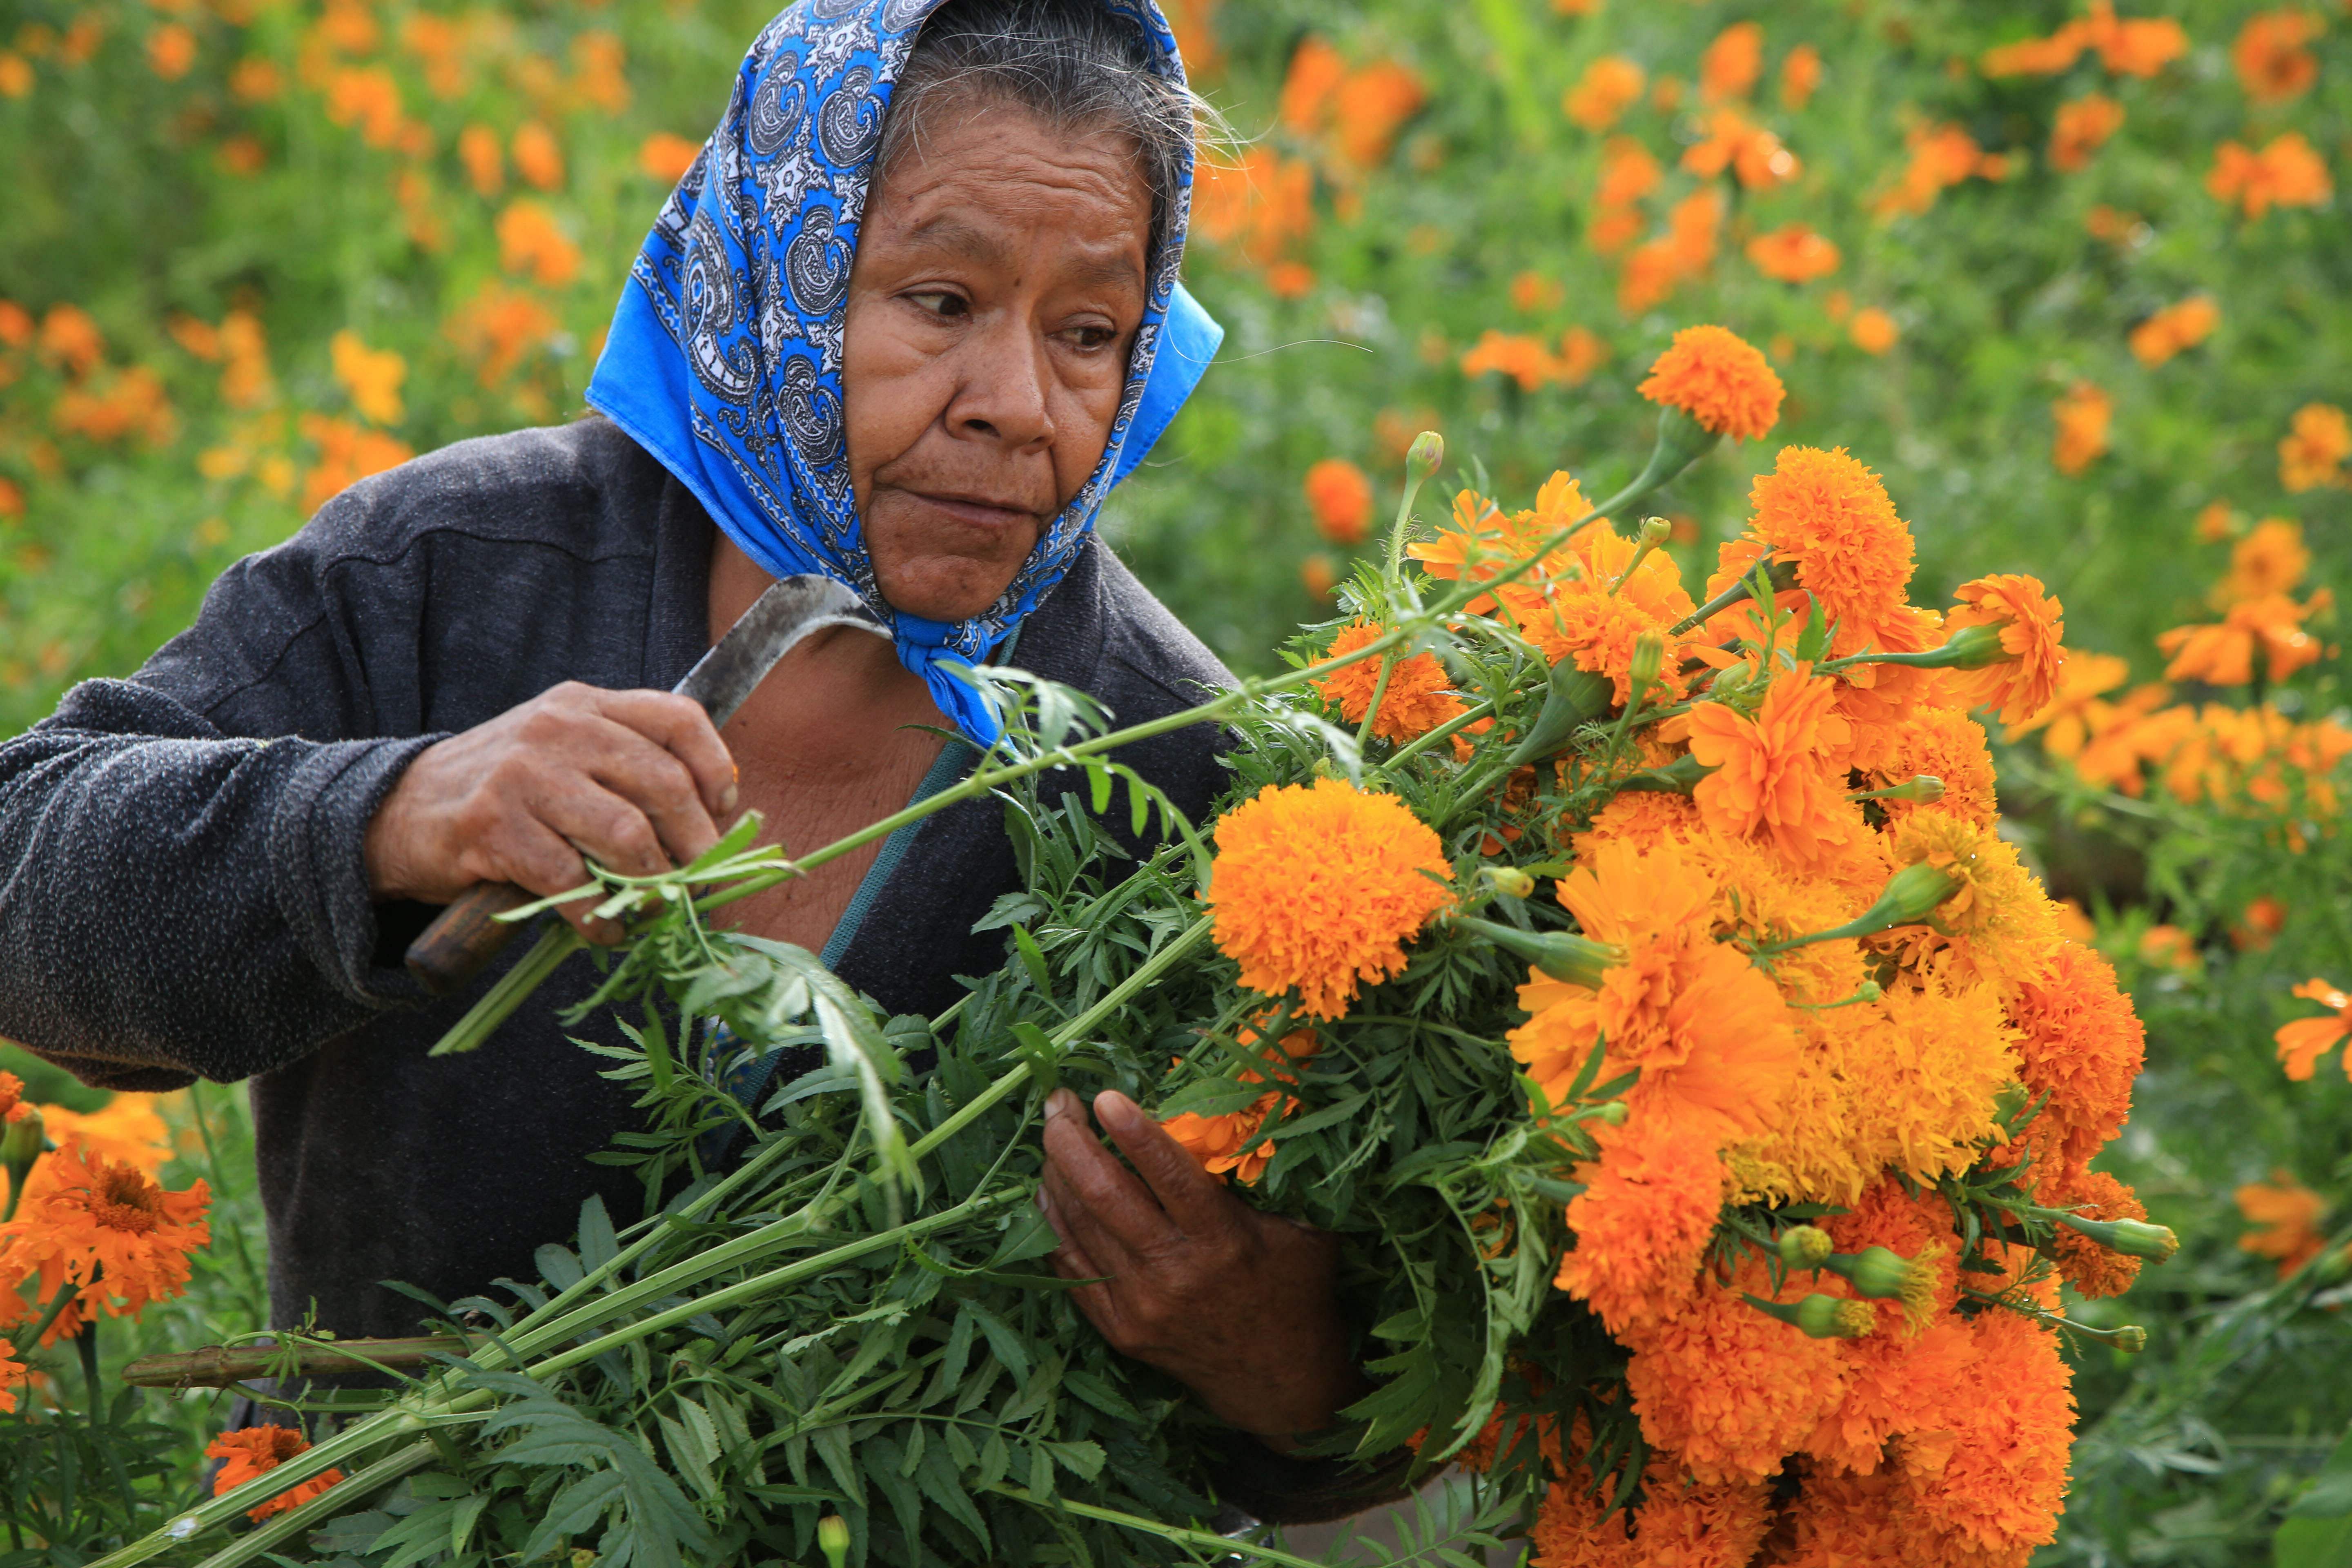 A farmer picks up Cempasuchil flowers used in the "Day of the Dead" season to decorate altars and tombs in Atlixco, Mexico. Credit: AFP Photo